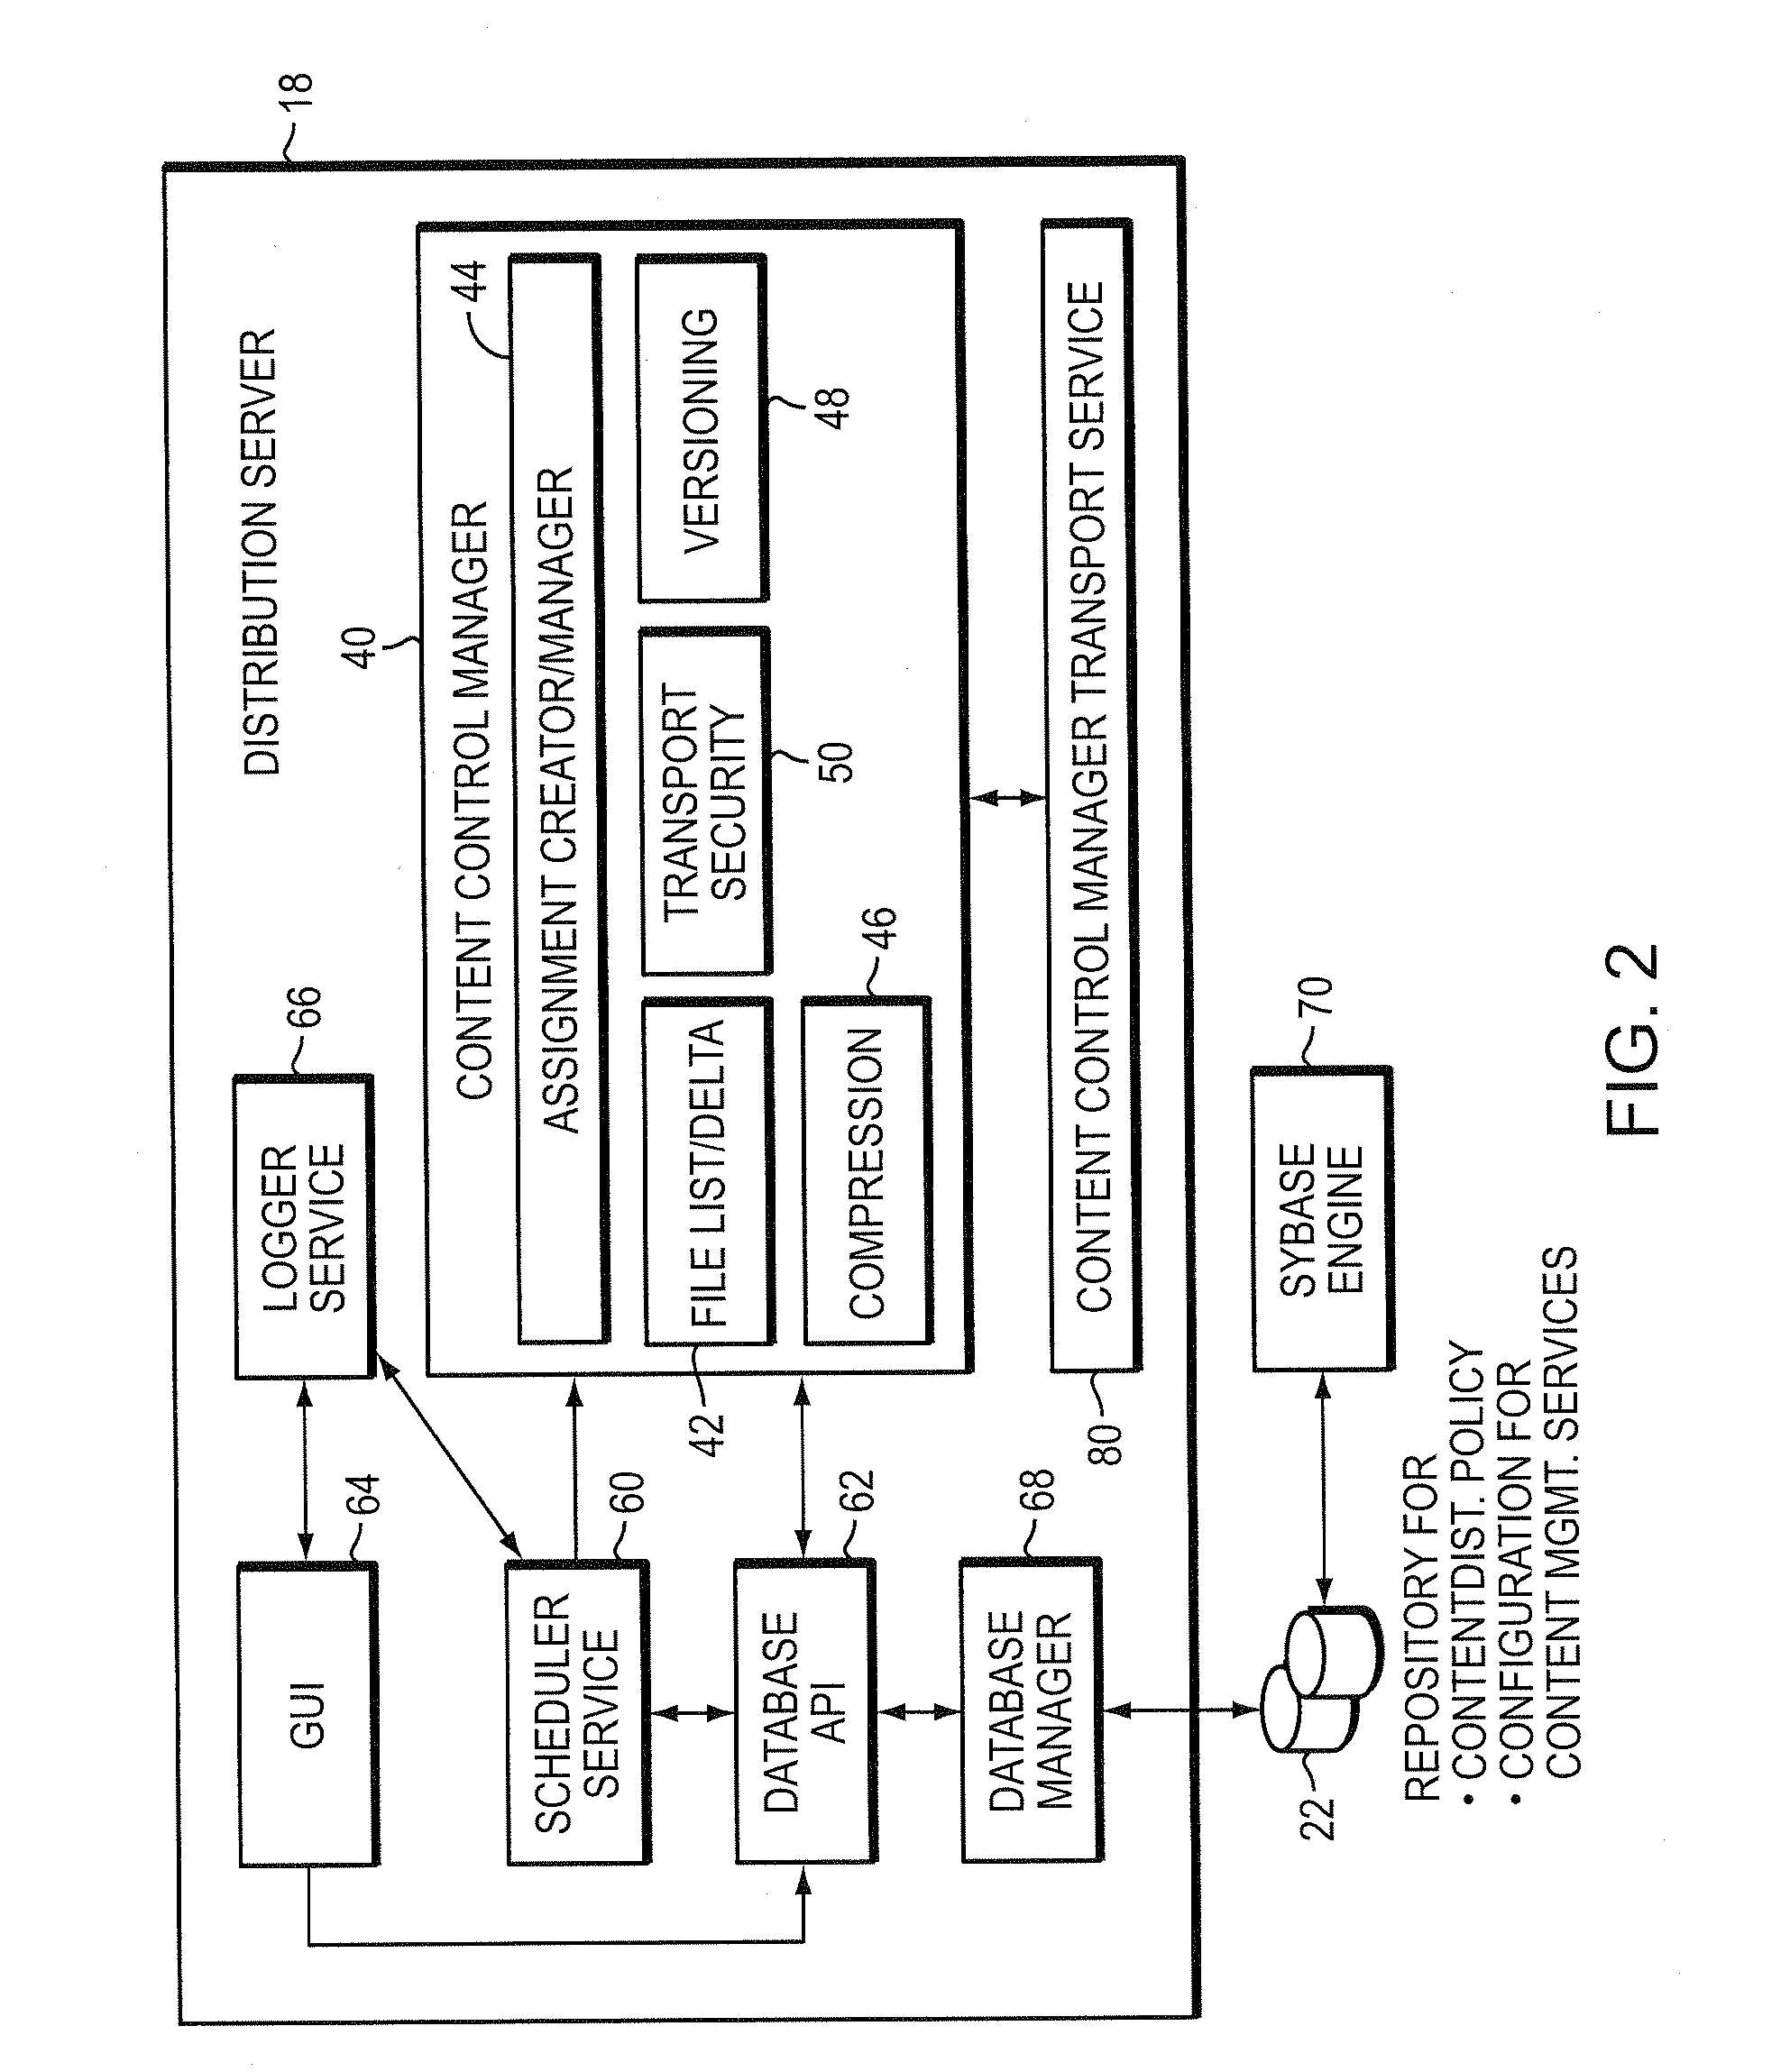 Method and apparatus for dynamic resource discovery and information distribution in a data network